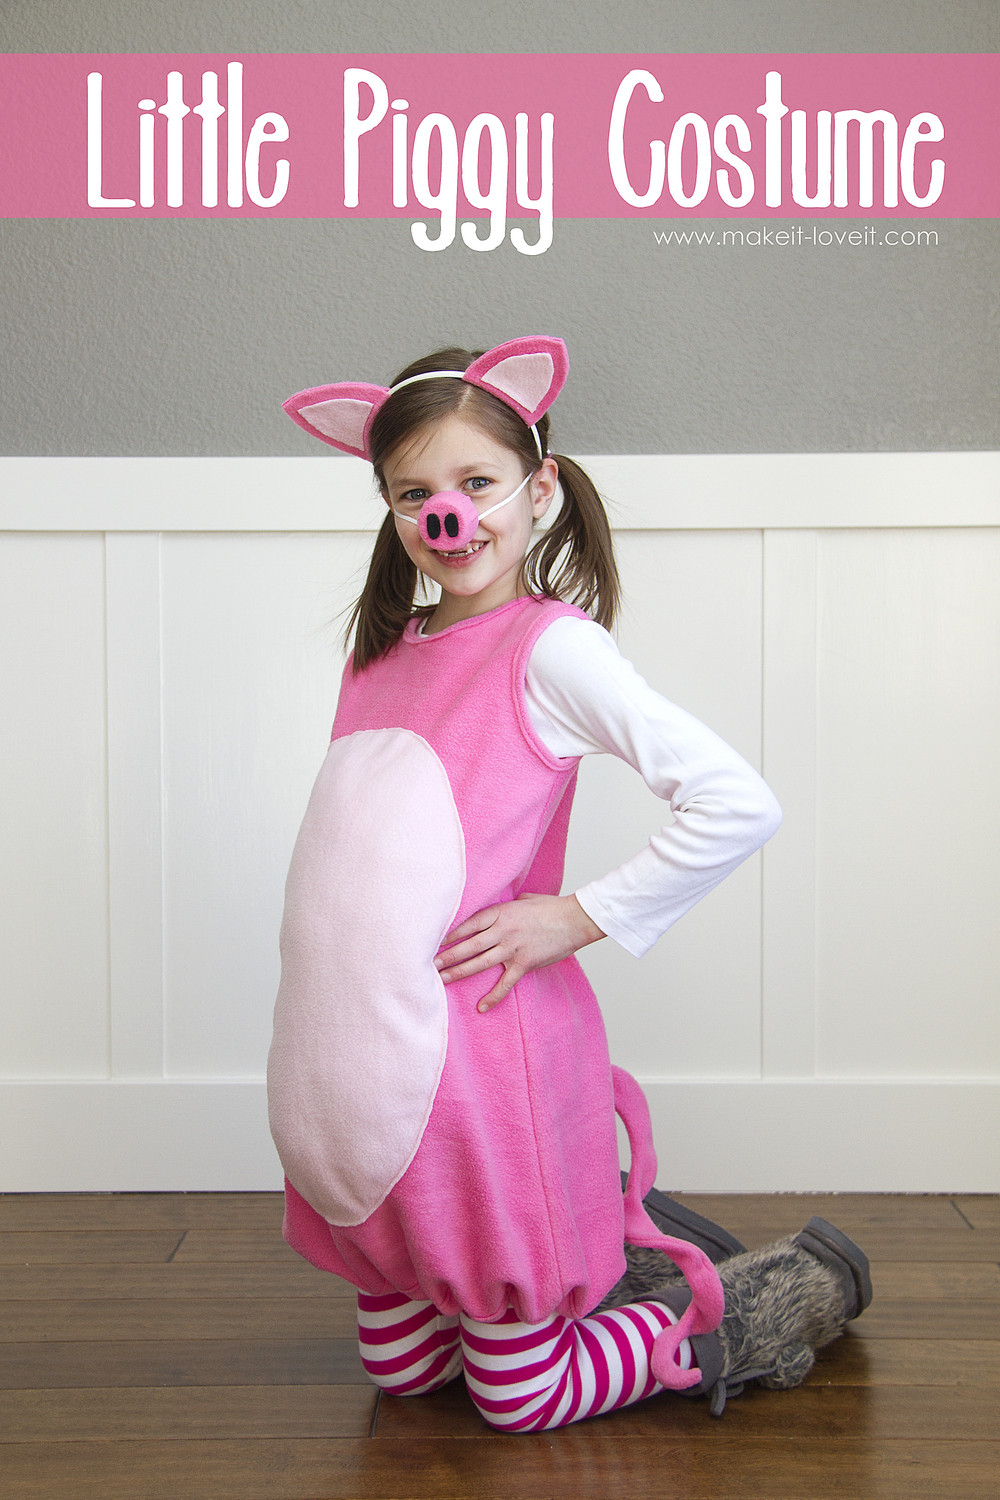 DIY Pig Costume
 Little Pig Costume with ears and snout